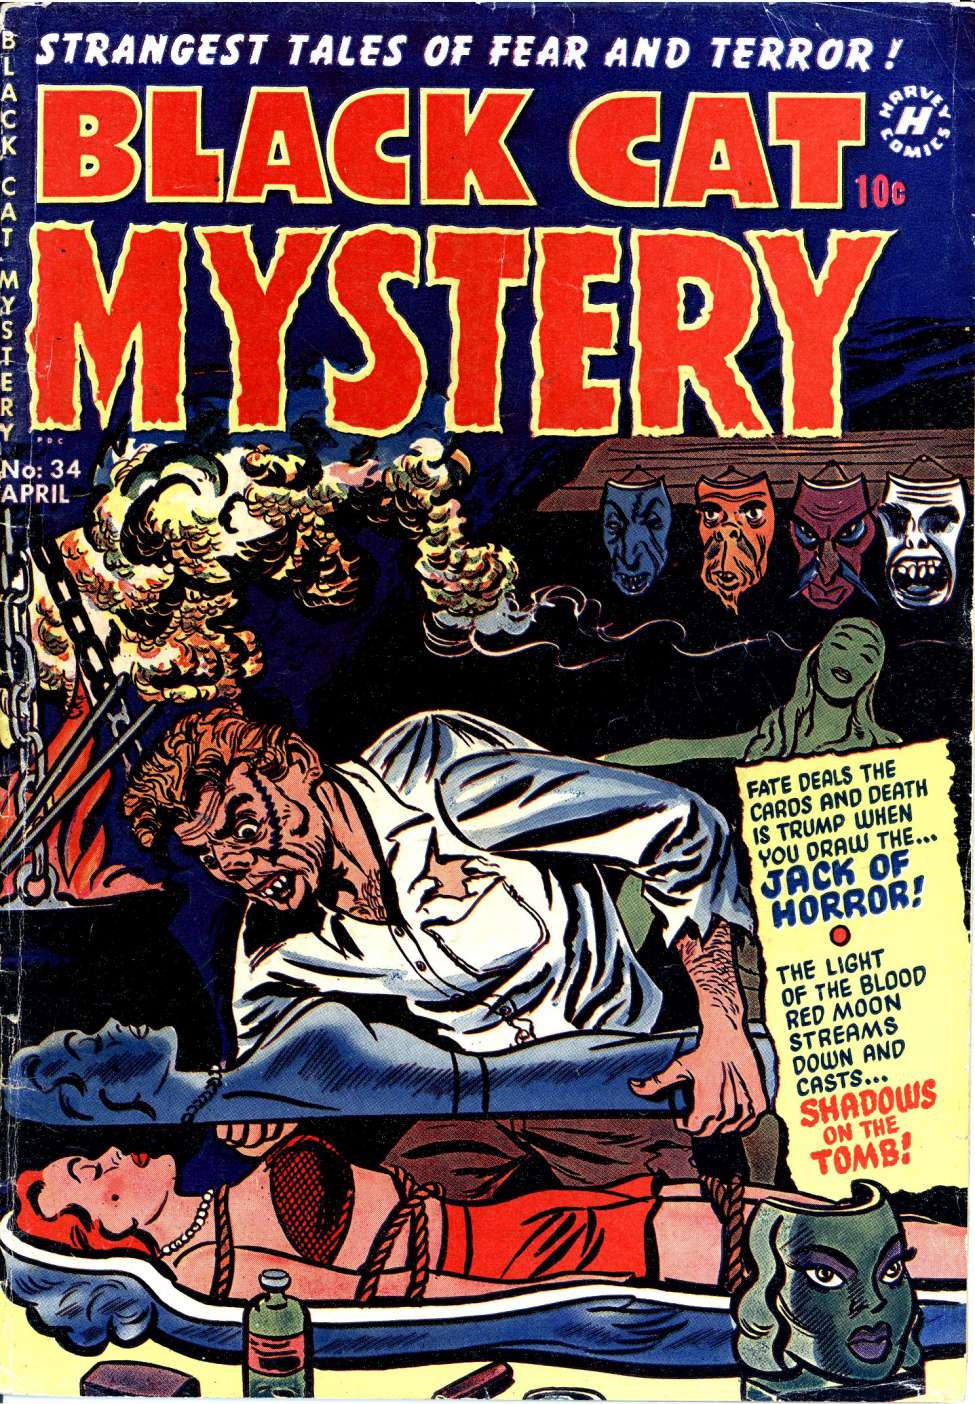 Comic Book Cover For Black Cat 34 (Mystery) - Version 1